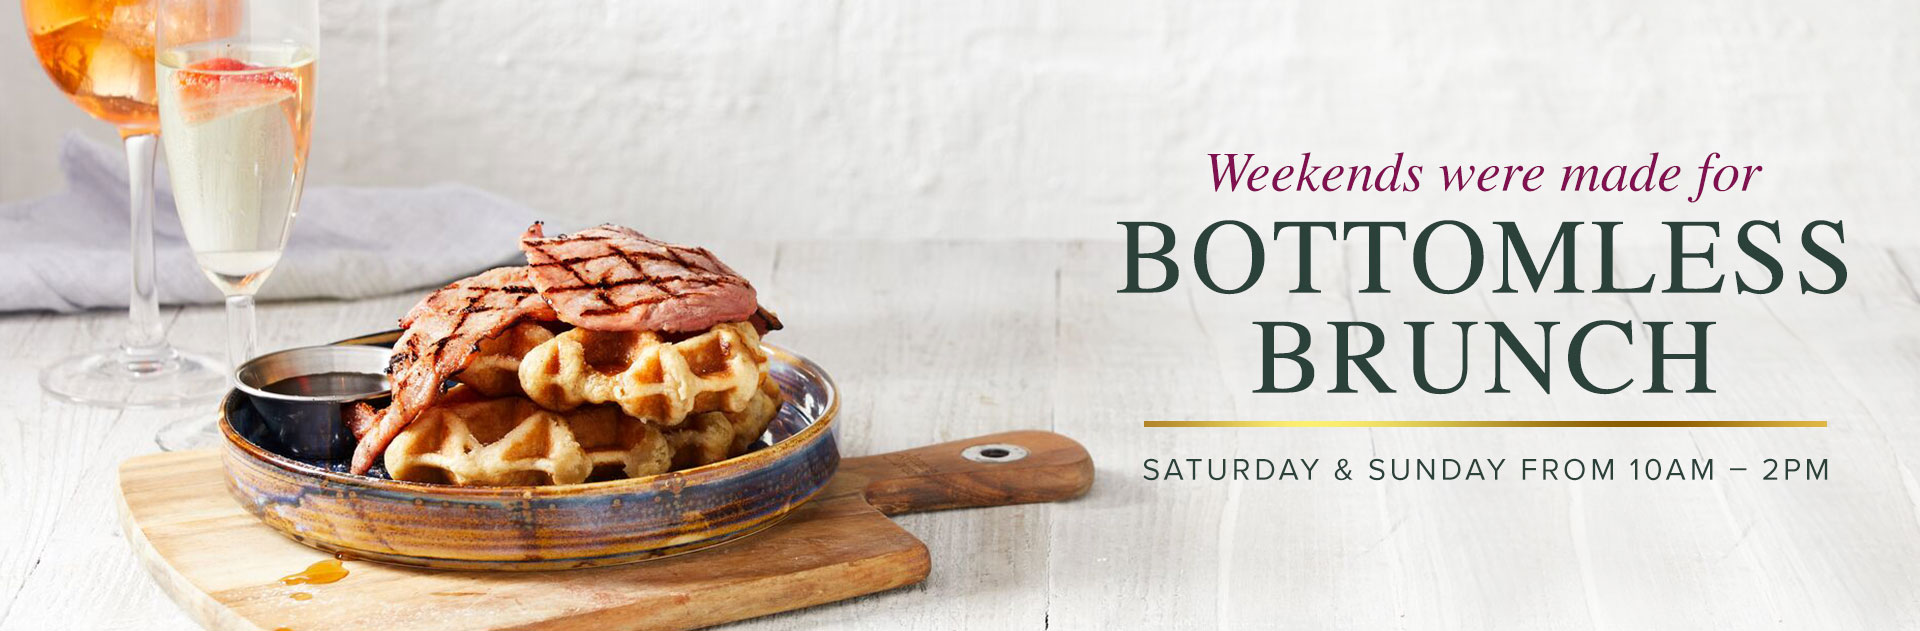 Ember Inns The Turner's Mill bottomless brunch of bacon, waffles and drinks